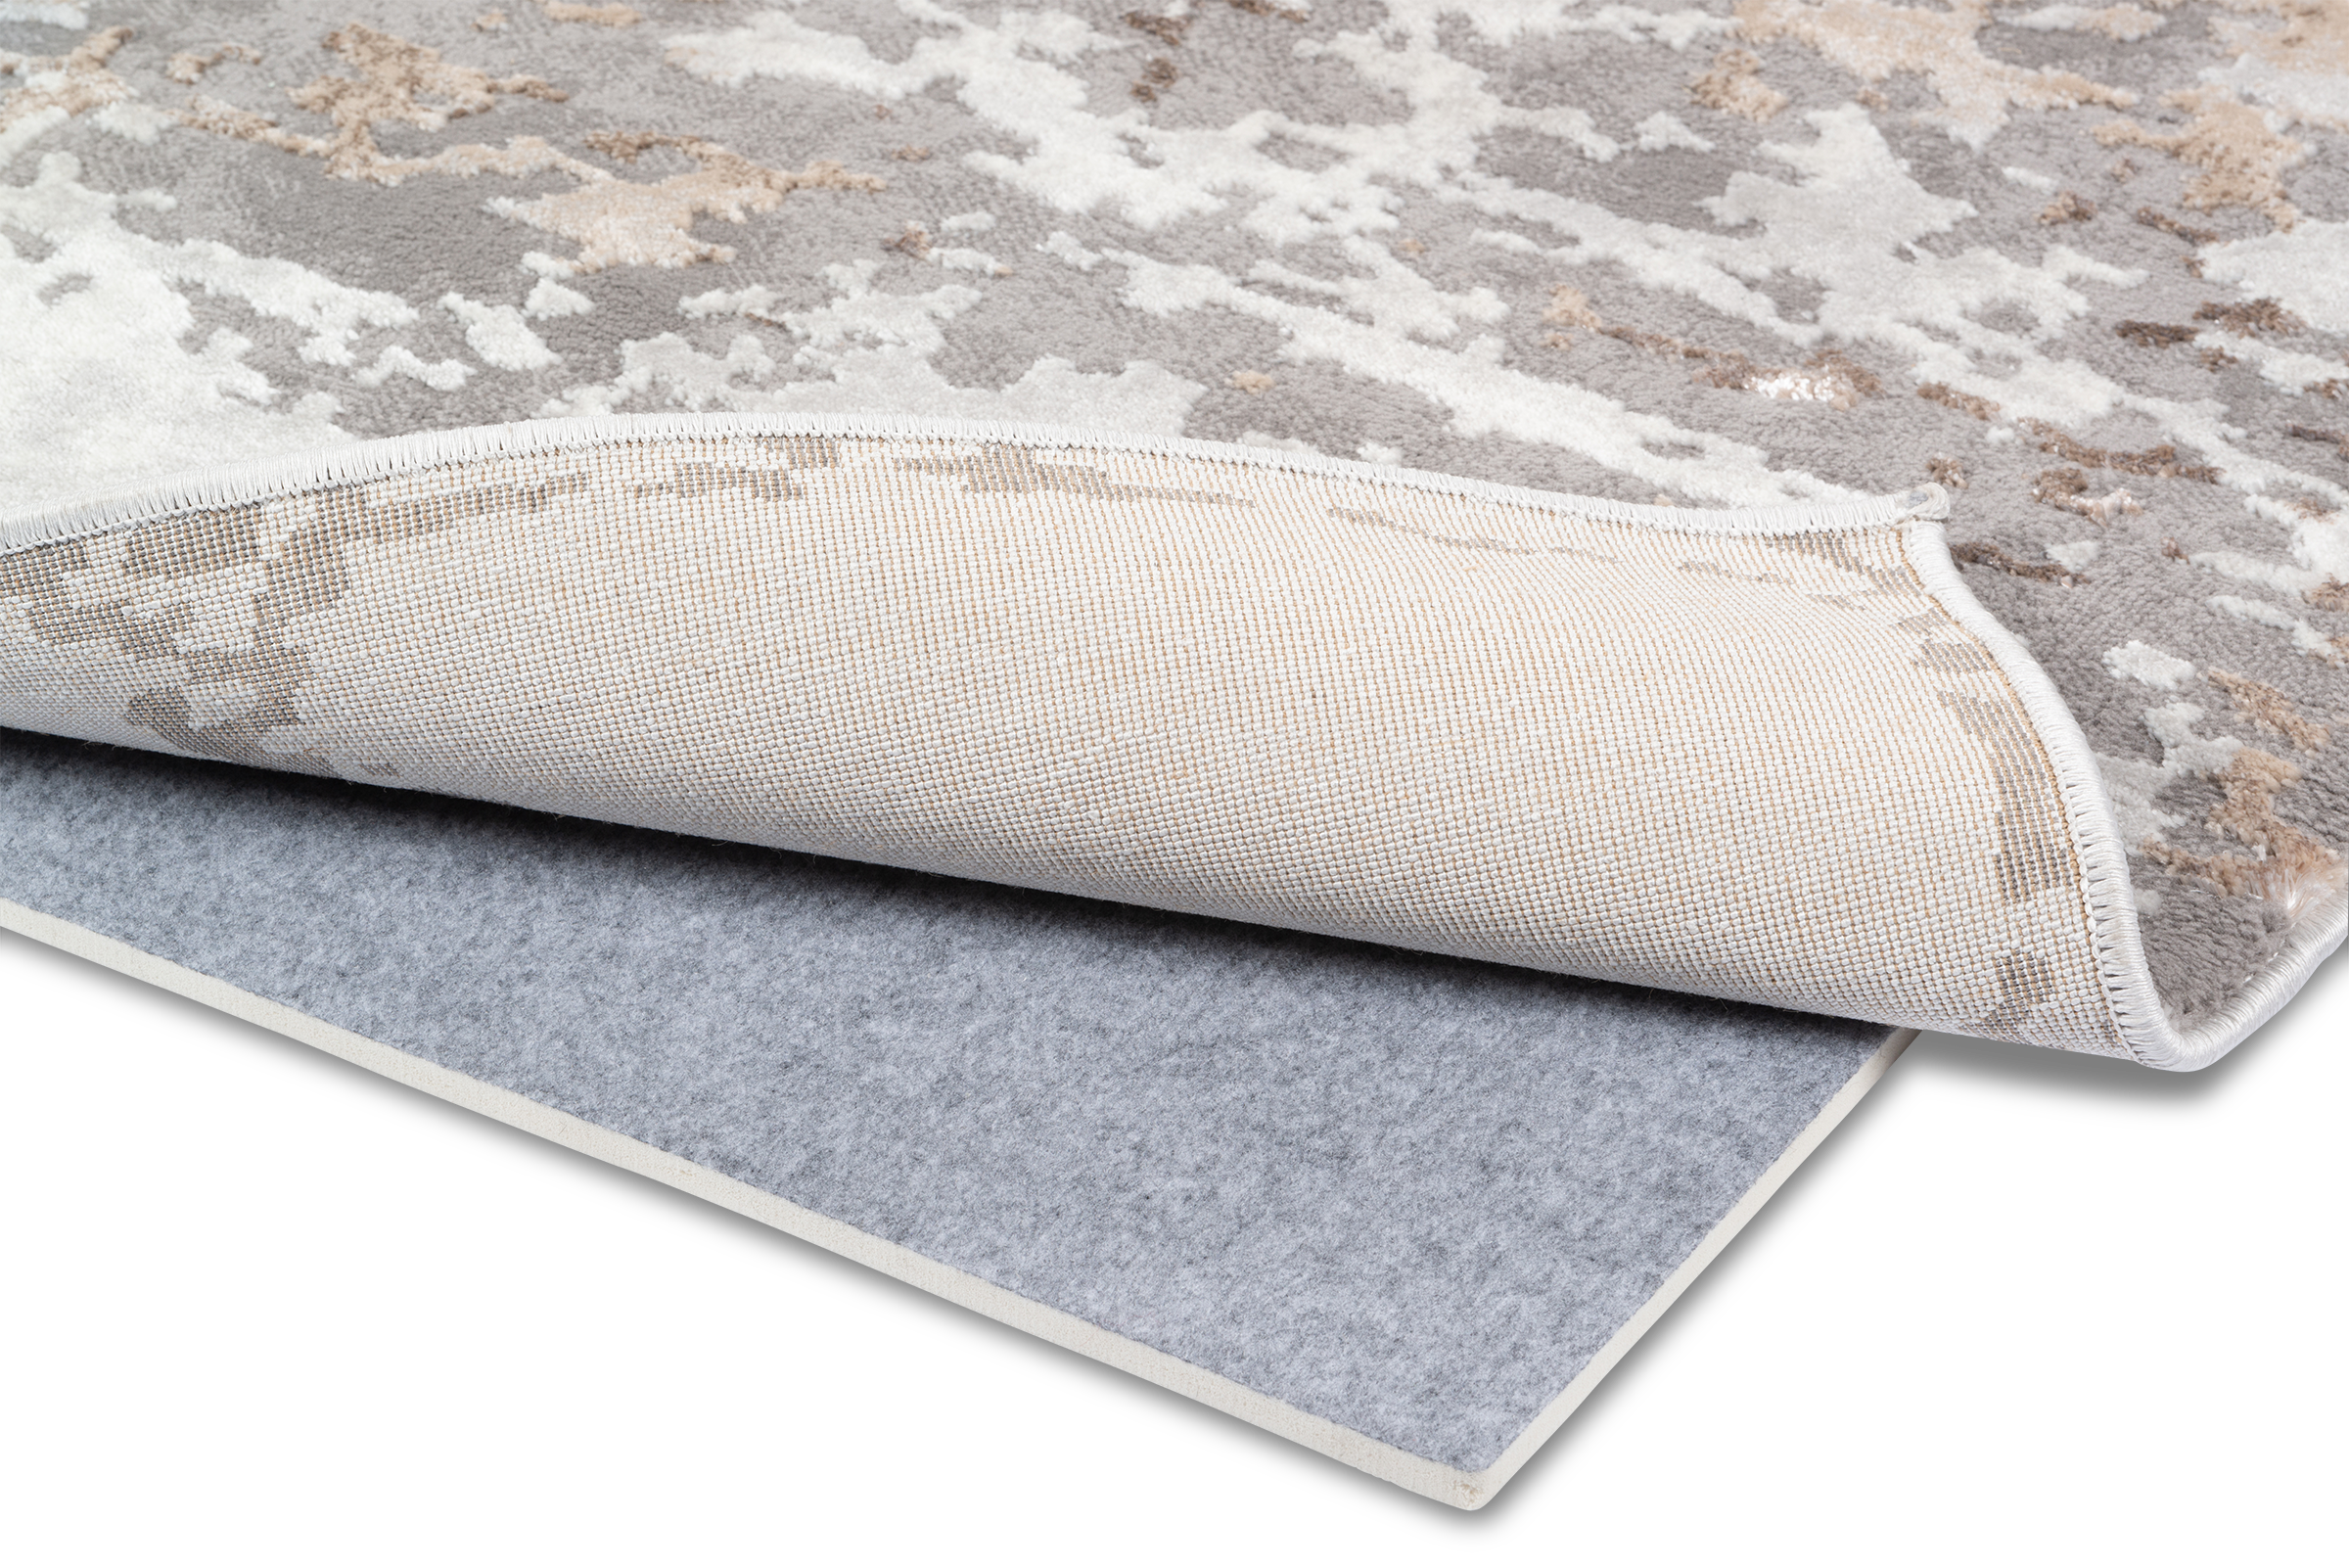 Spillguard Carpet Pad, Deluxe 3/8 Thick